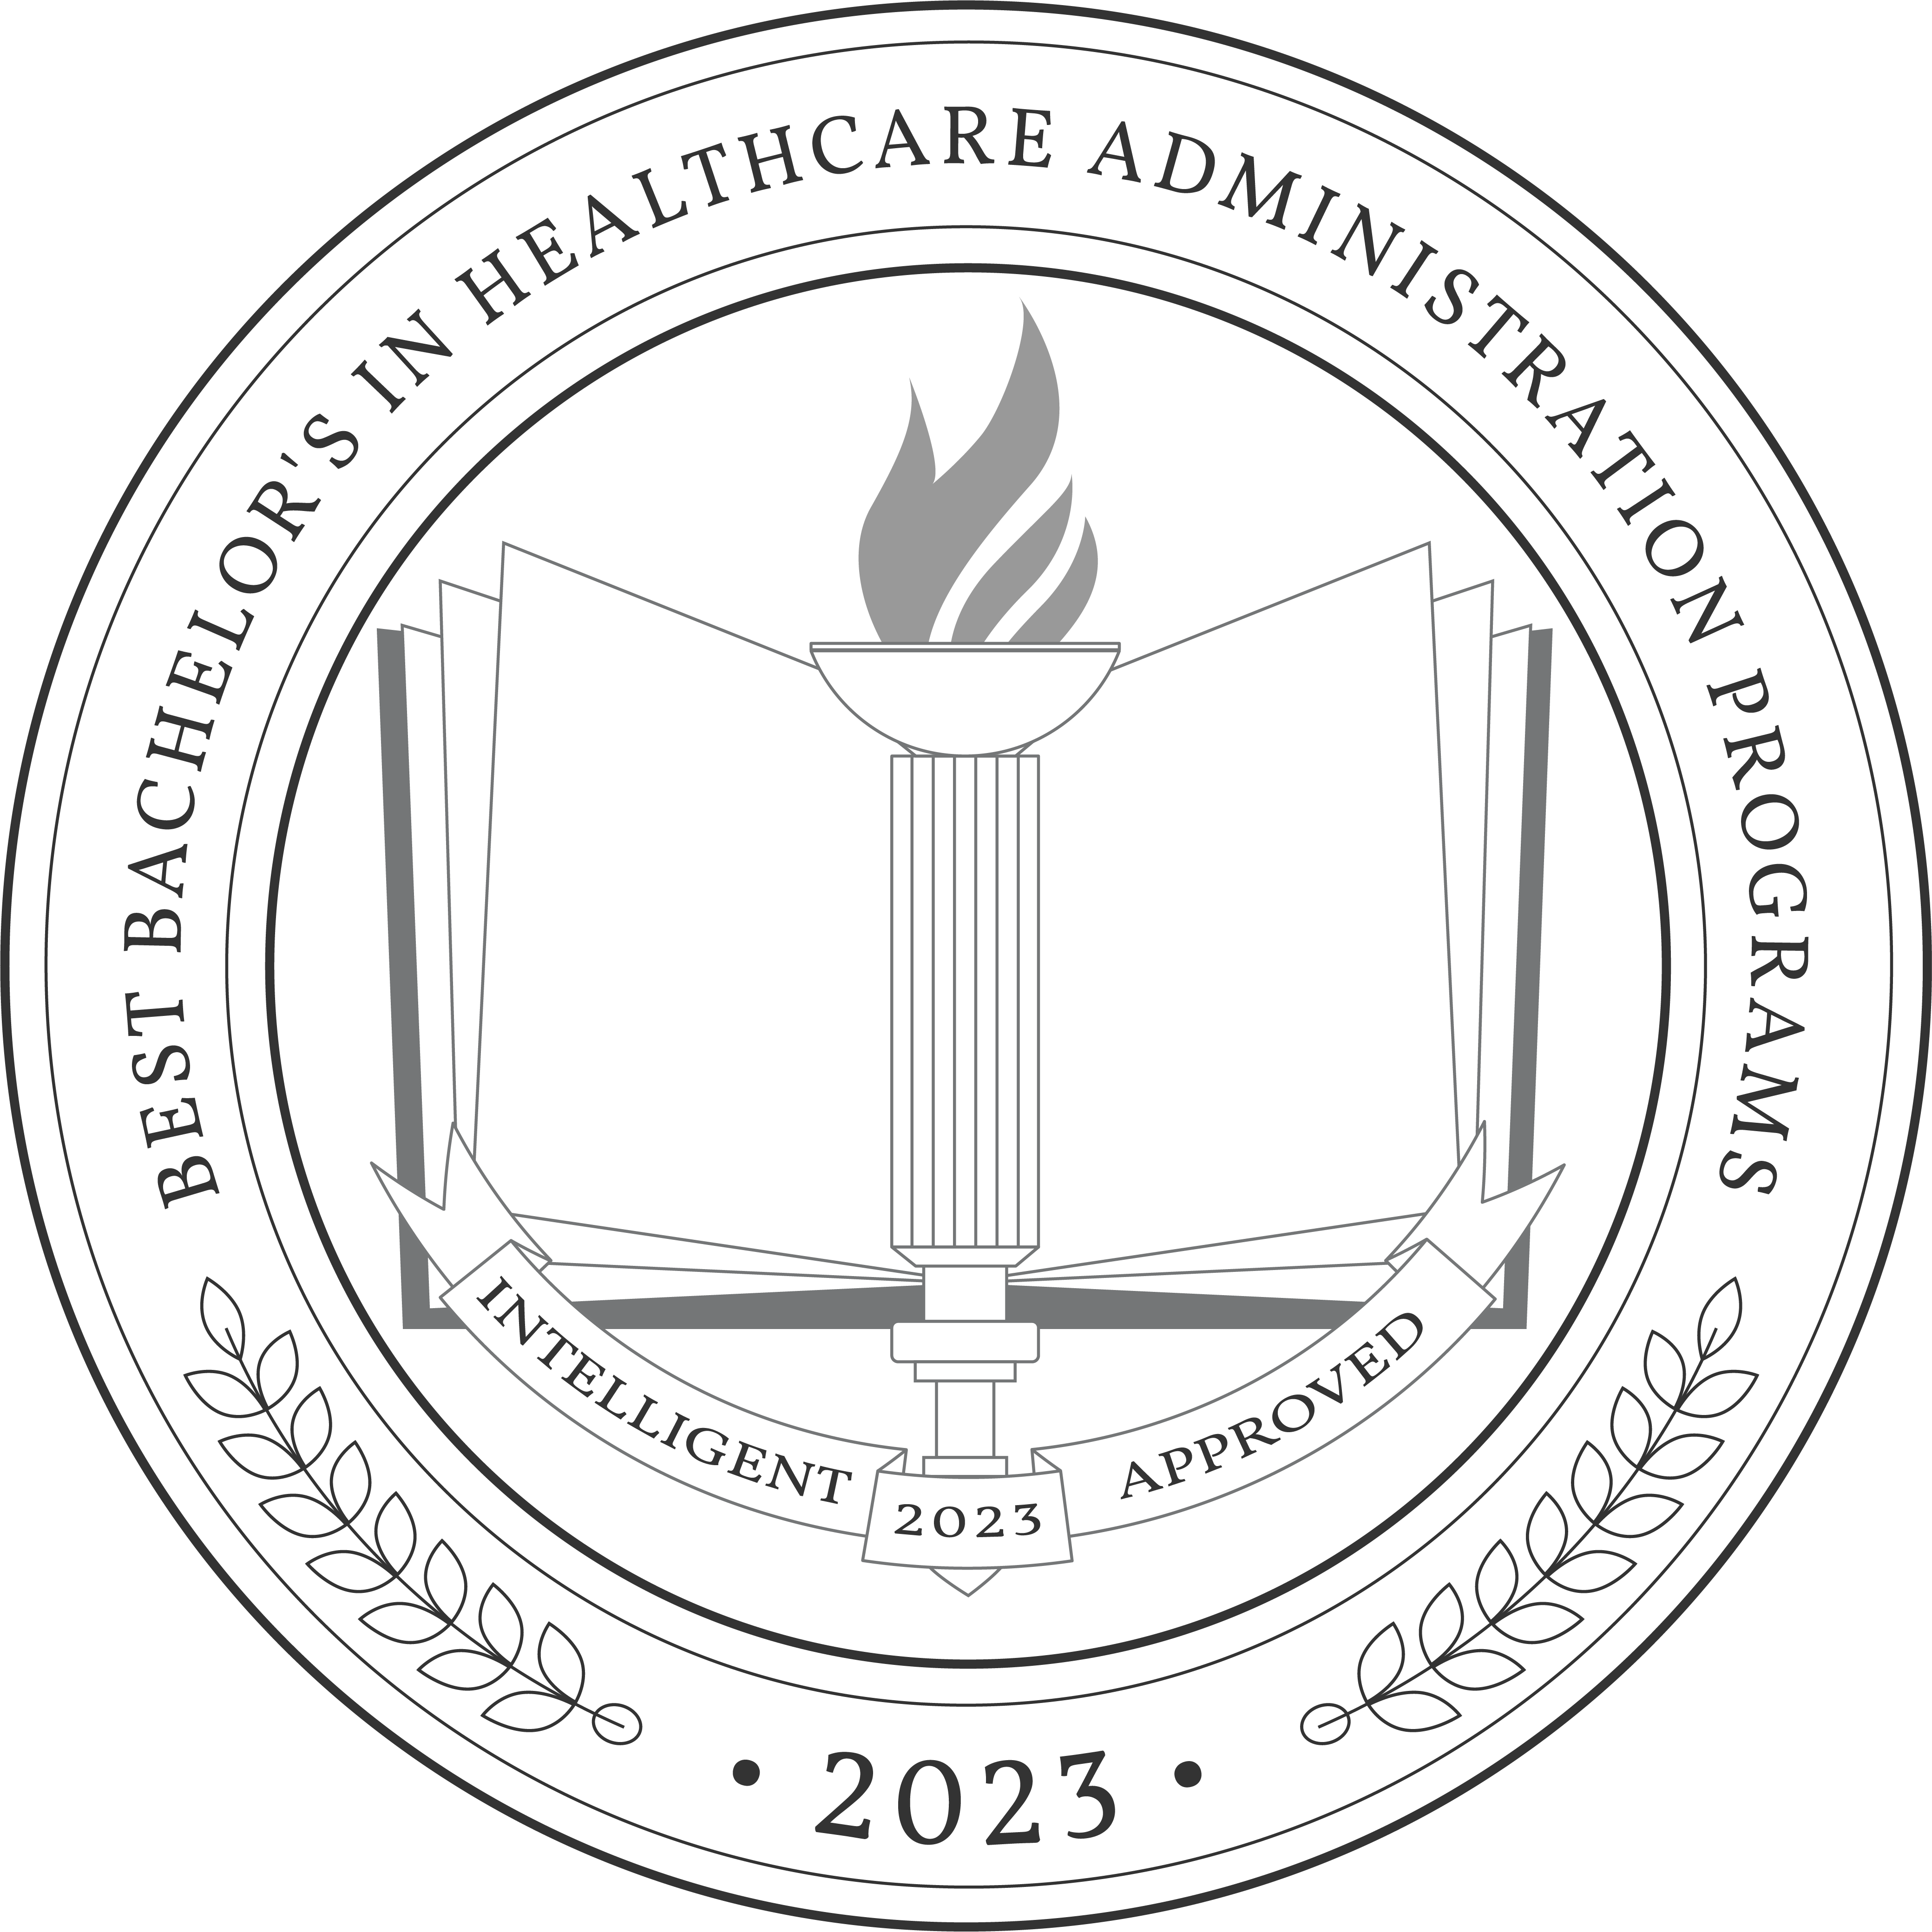 Best Bachelor's in Healthcare Administration